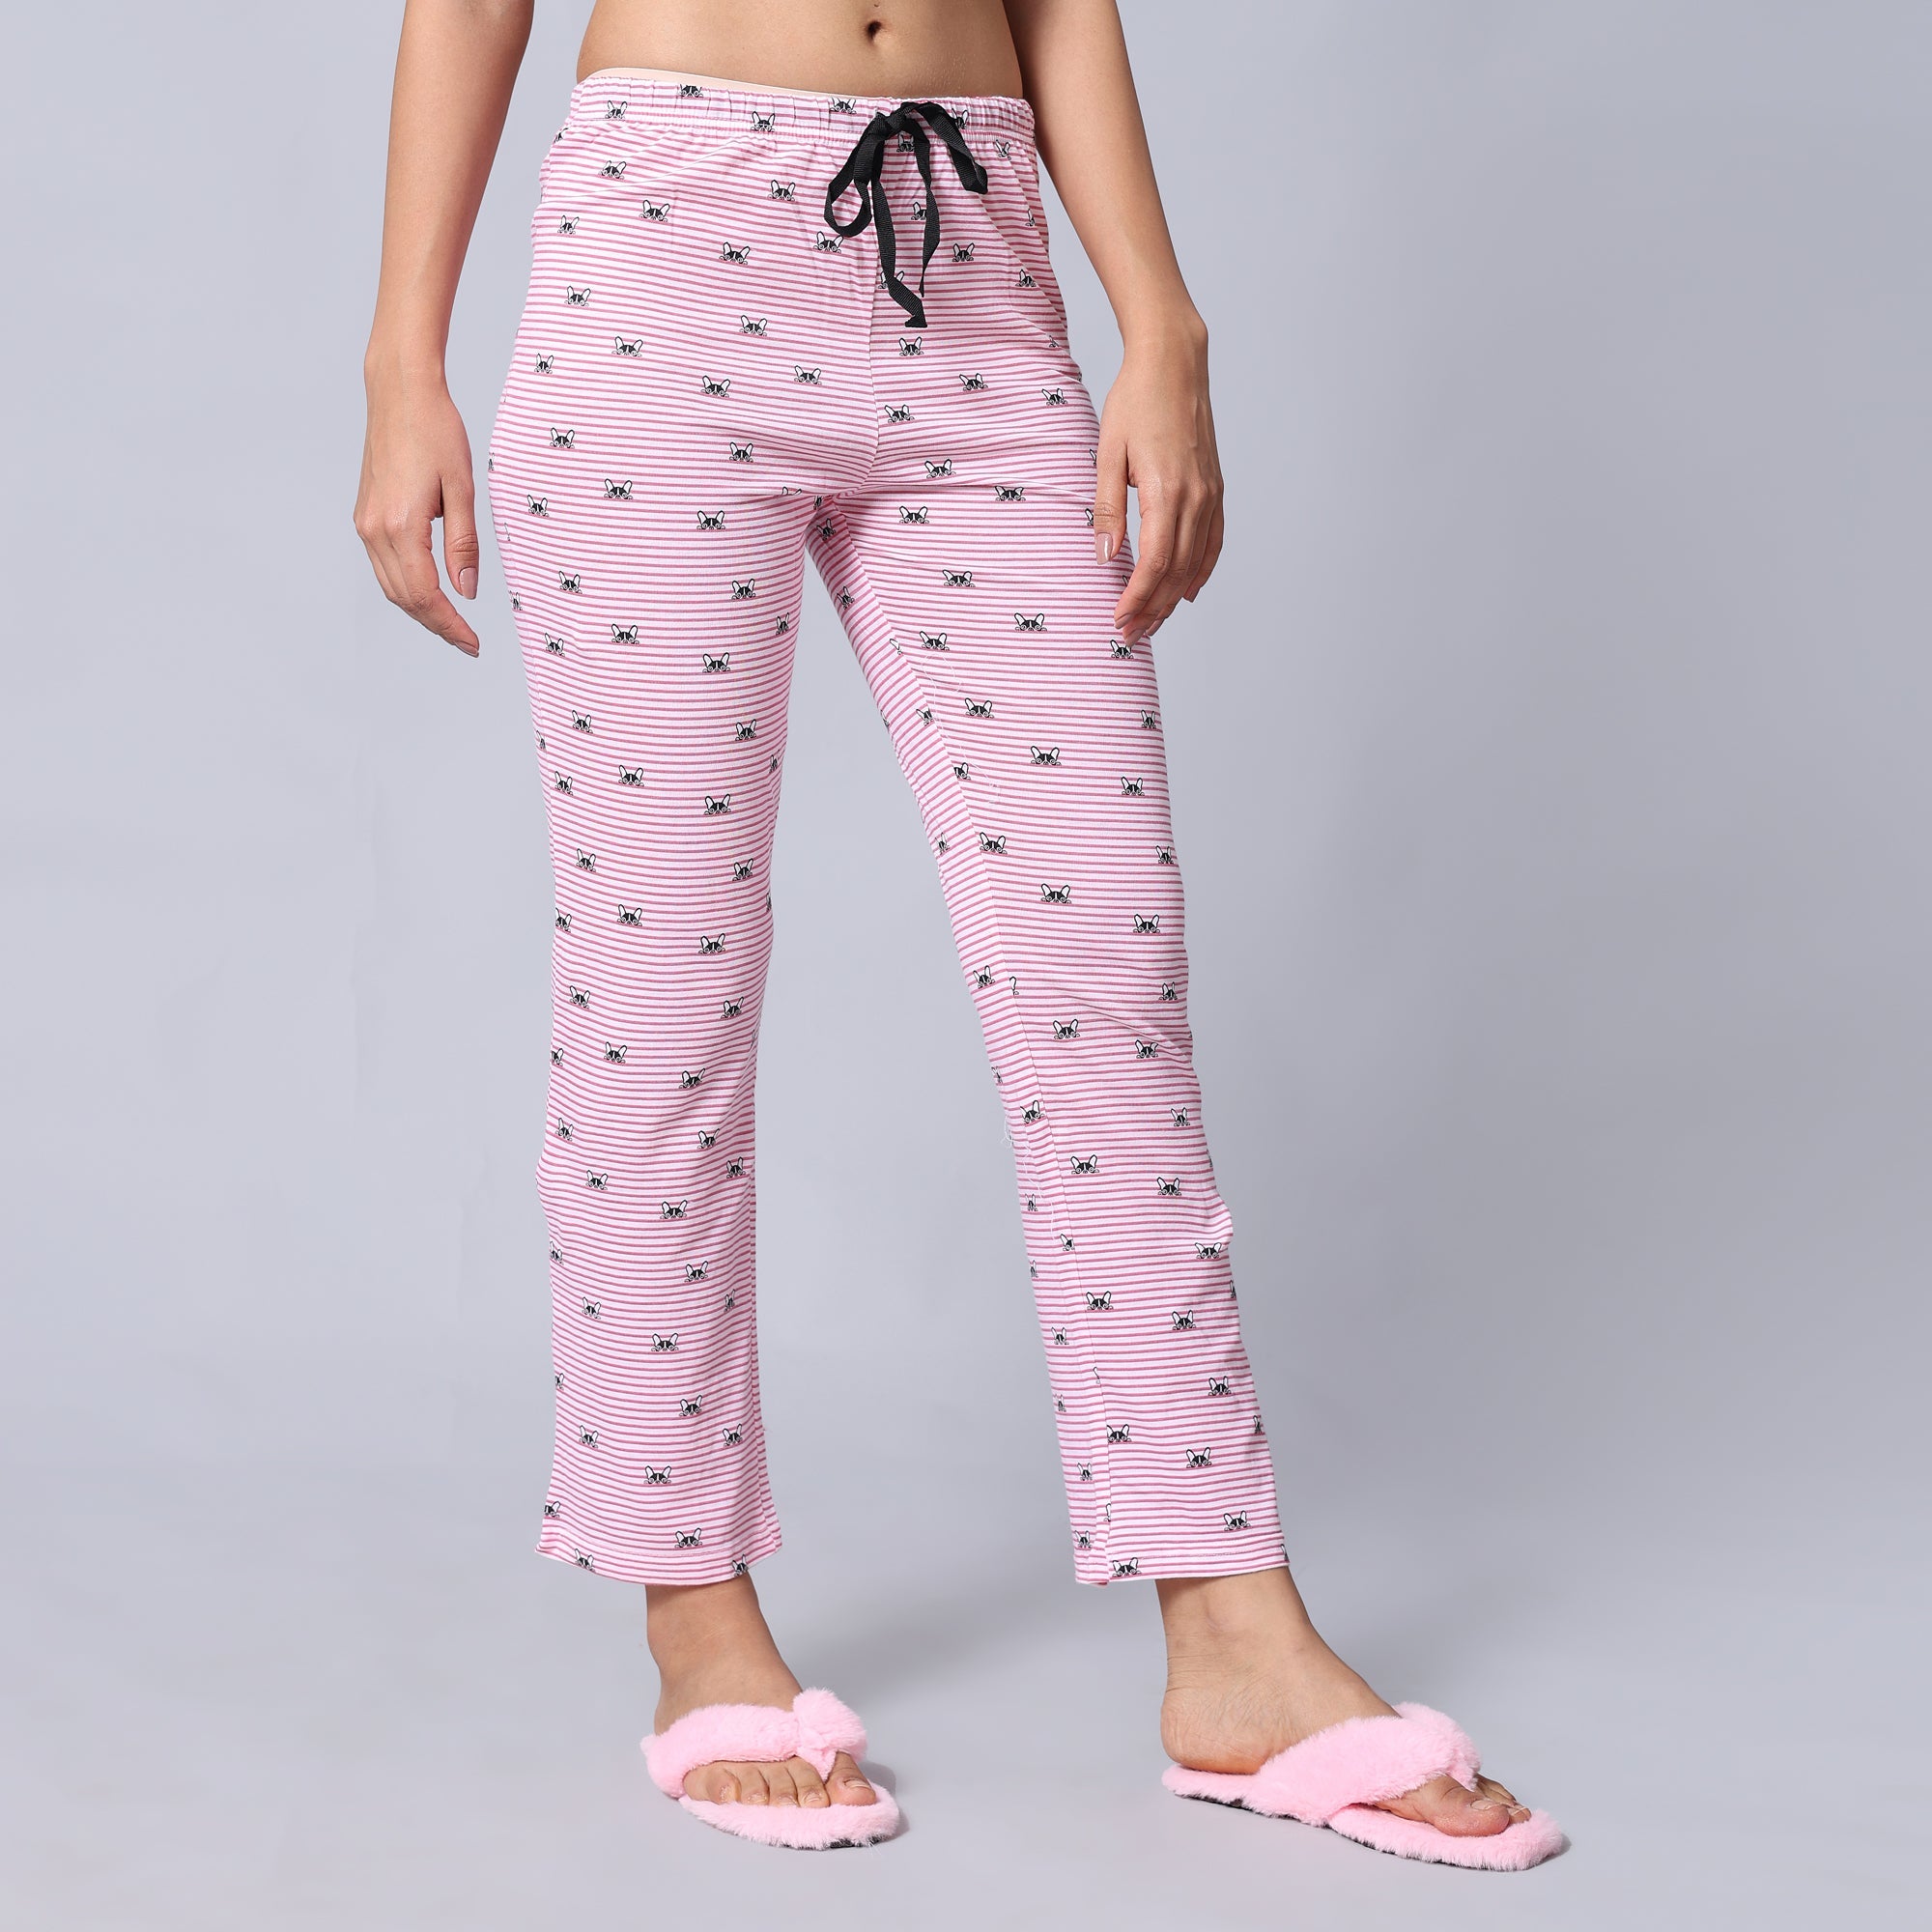 Evolove Women's Super Soft Comfortable Cotton Printed Pyjama Relaxed Lounge Pants with Pockets